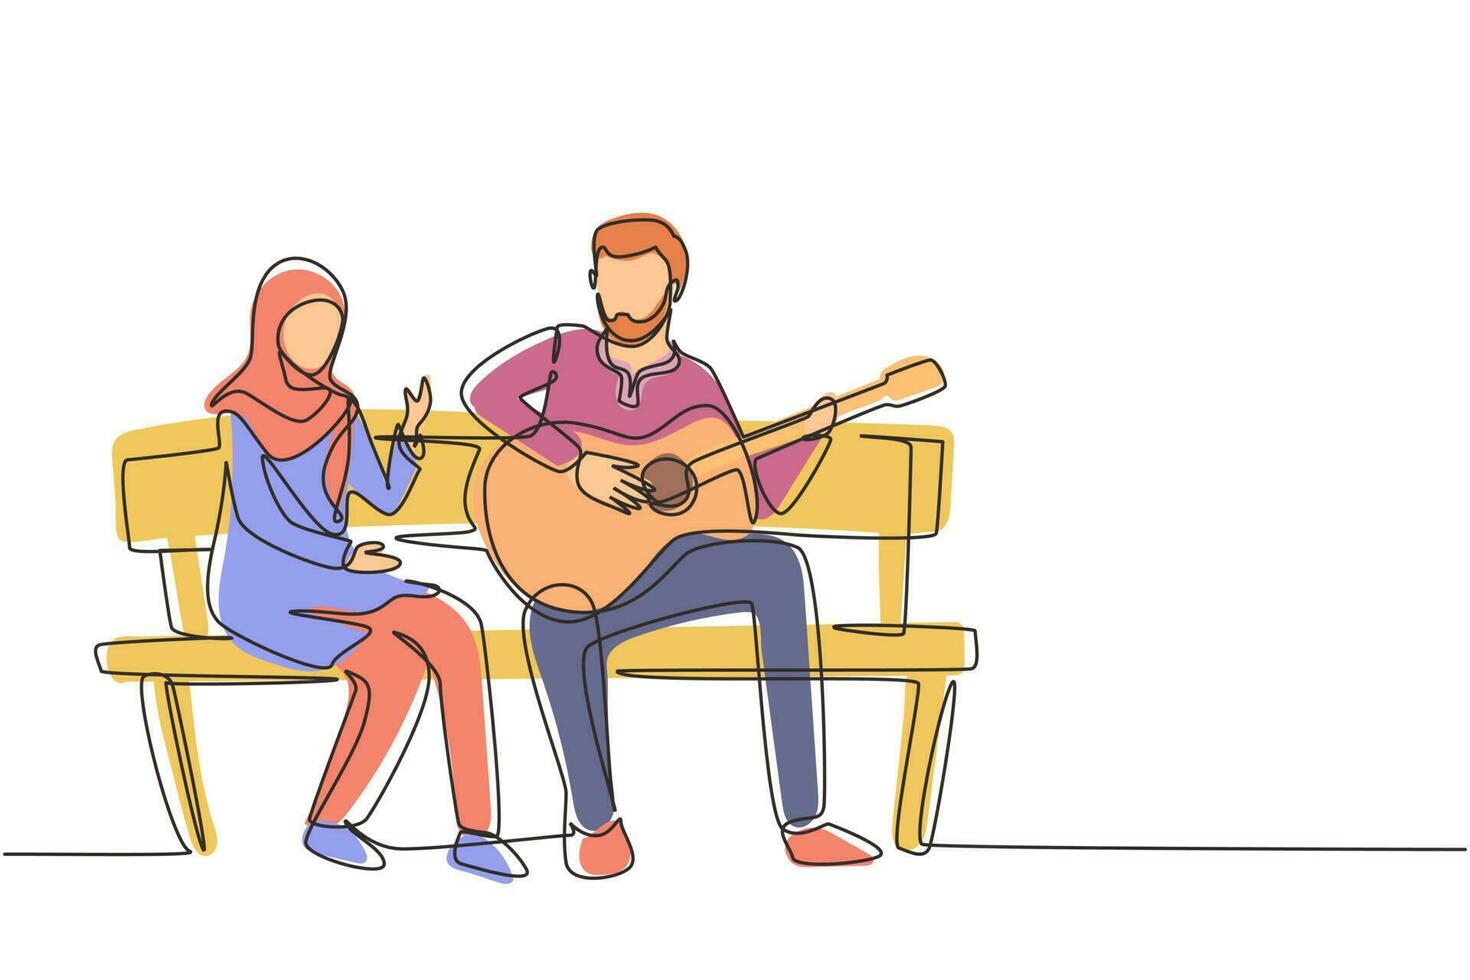 Single continuous line drawing Arabian people sitting on wooden bench in park. Couple on date, man playing music on guitar, girl listen and singing together. One line draw graphic vector illustration